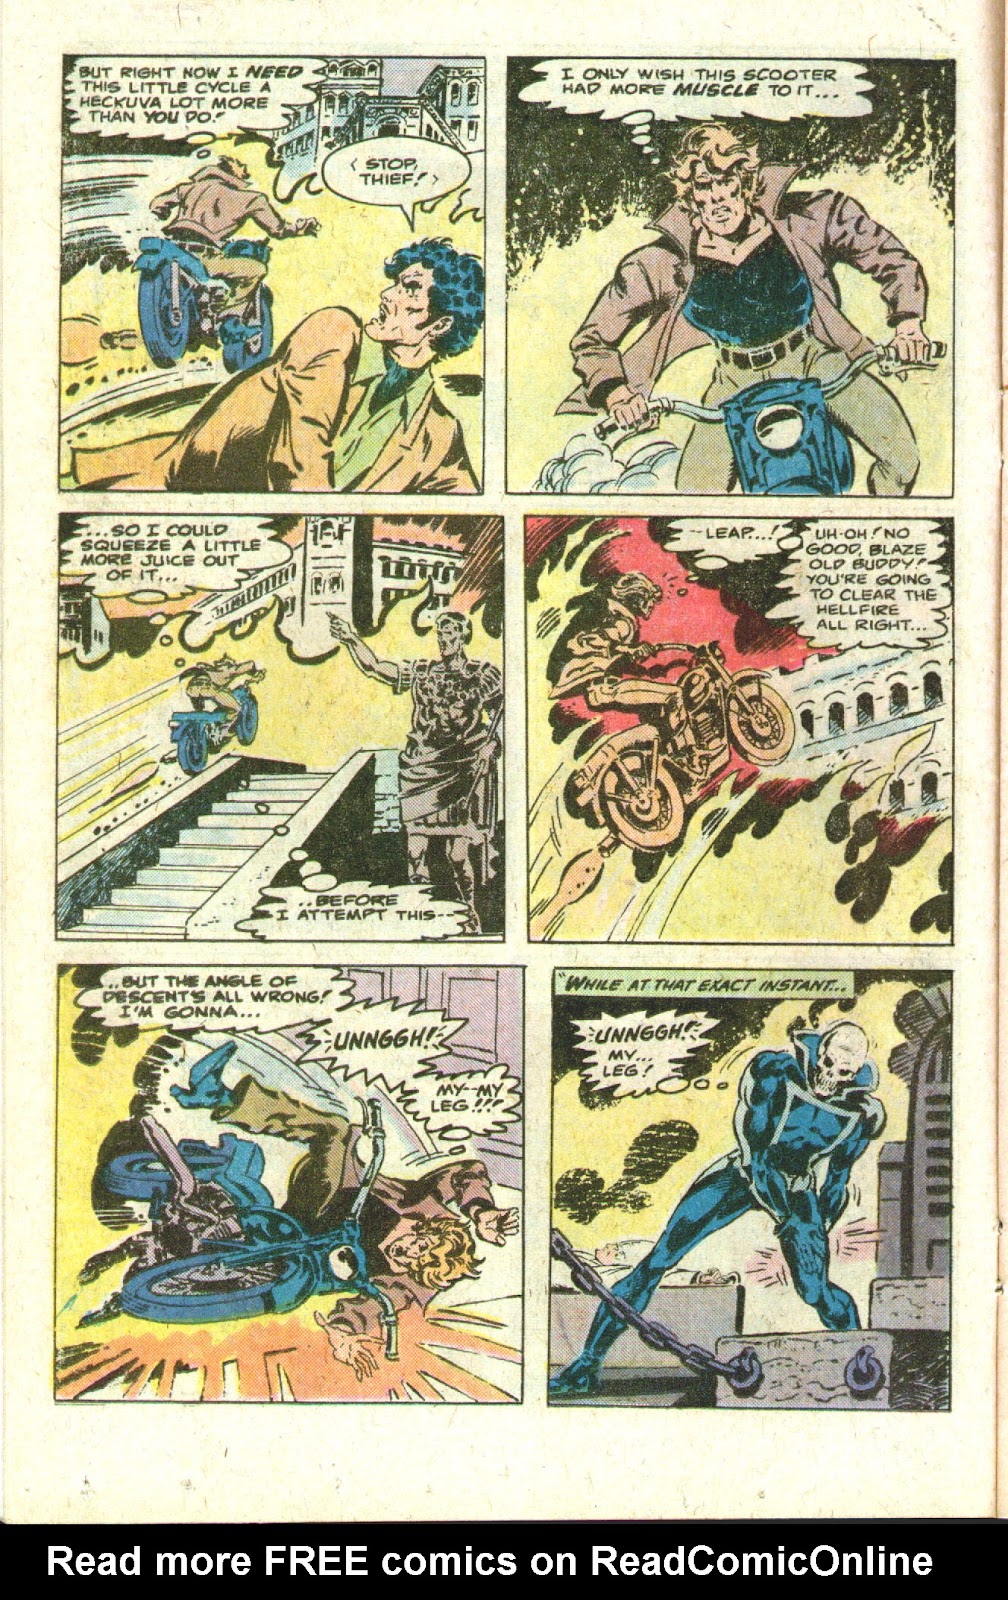 What If? (1977) issue 28 - Daredevil became an agent of SHIELD - Page 18